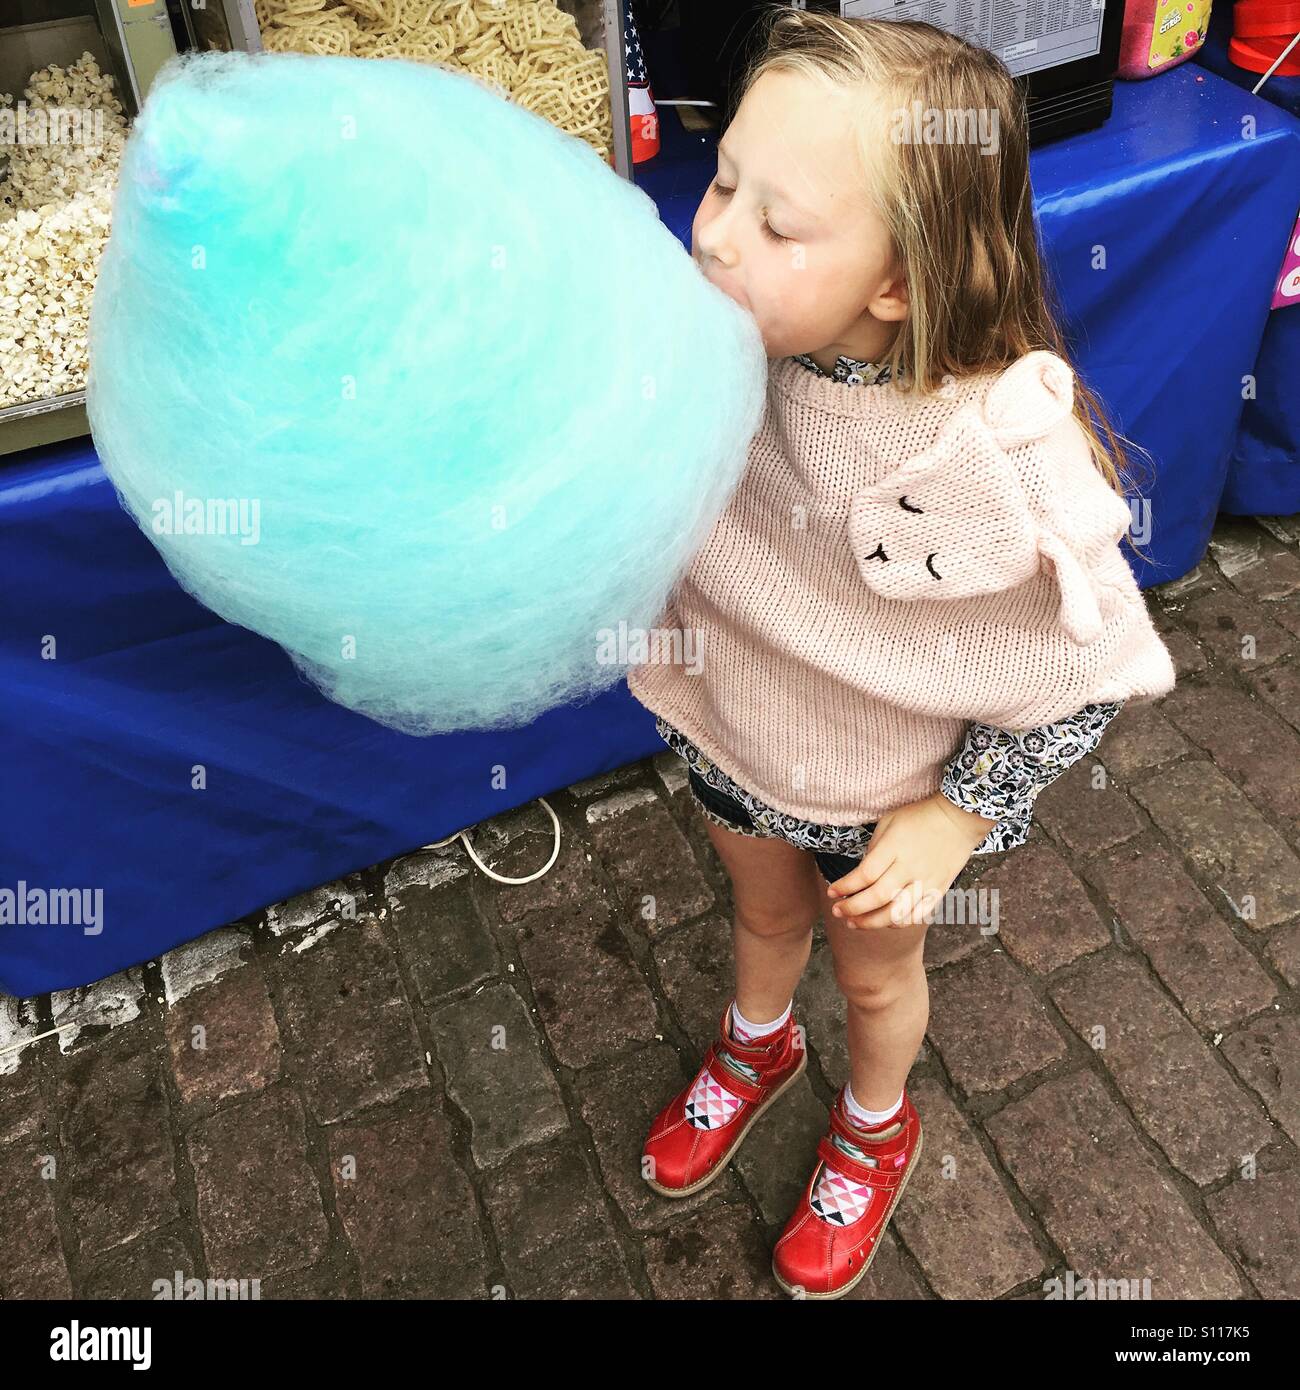 Girl eating blue candy floss Stock Photo